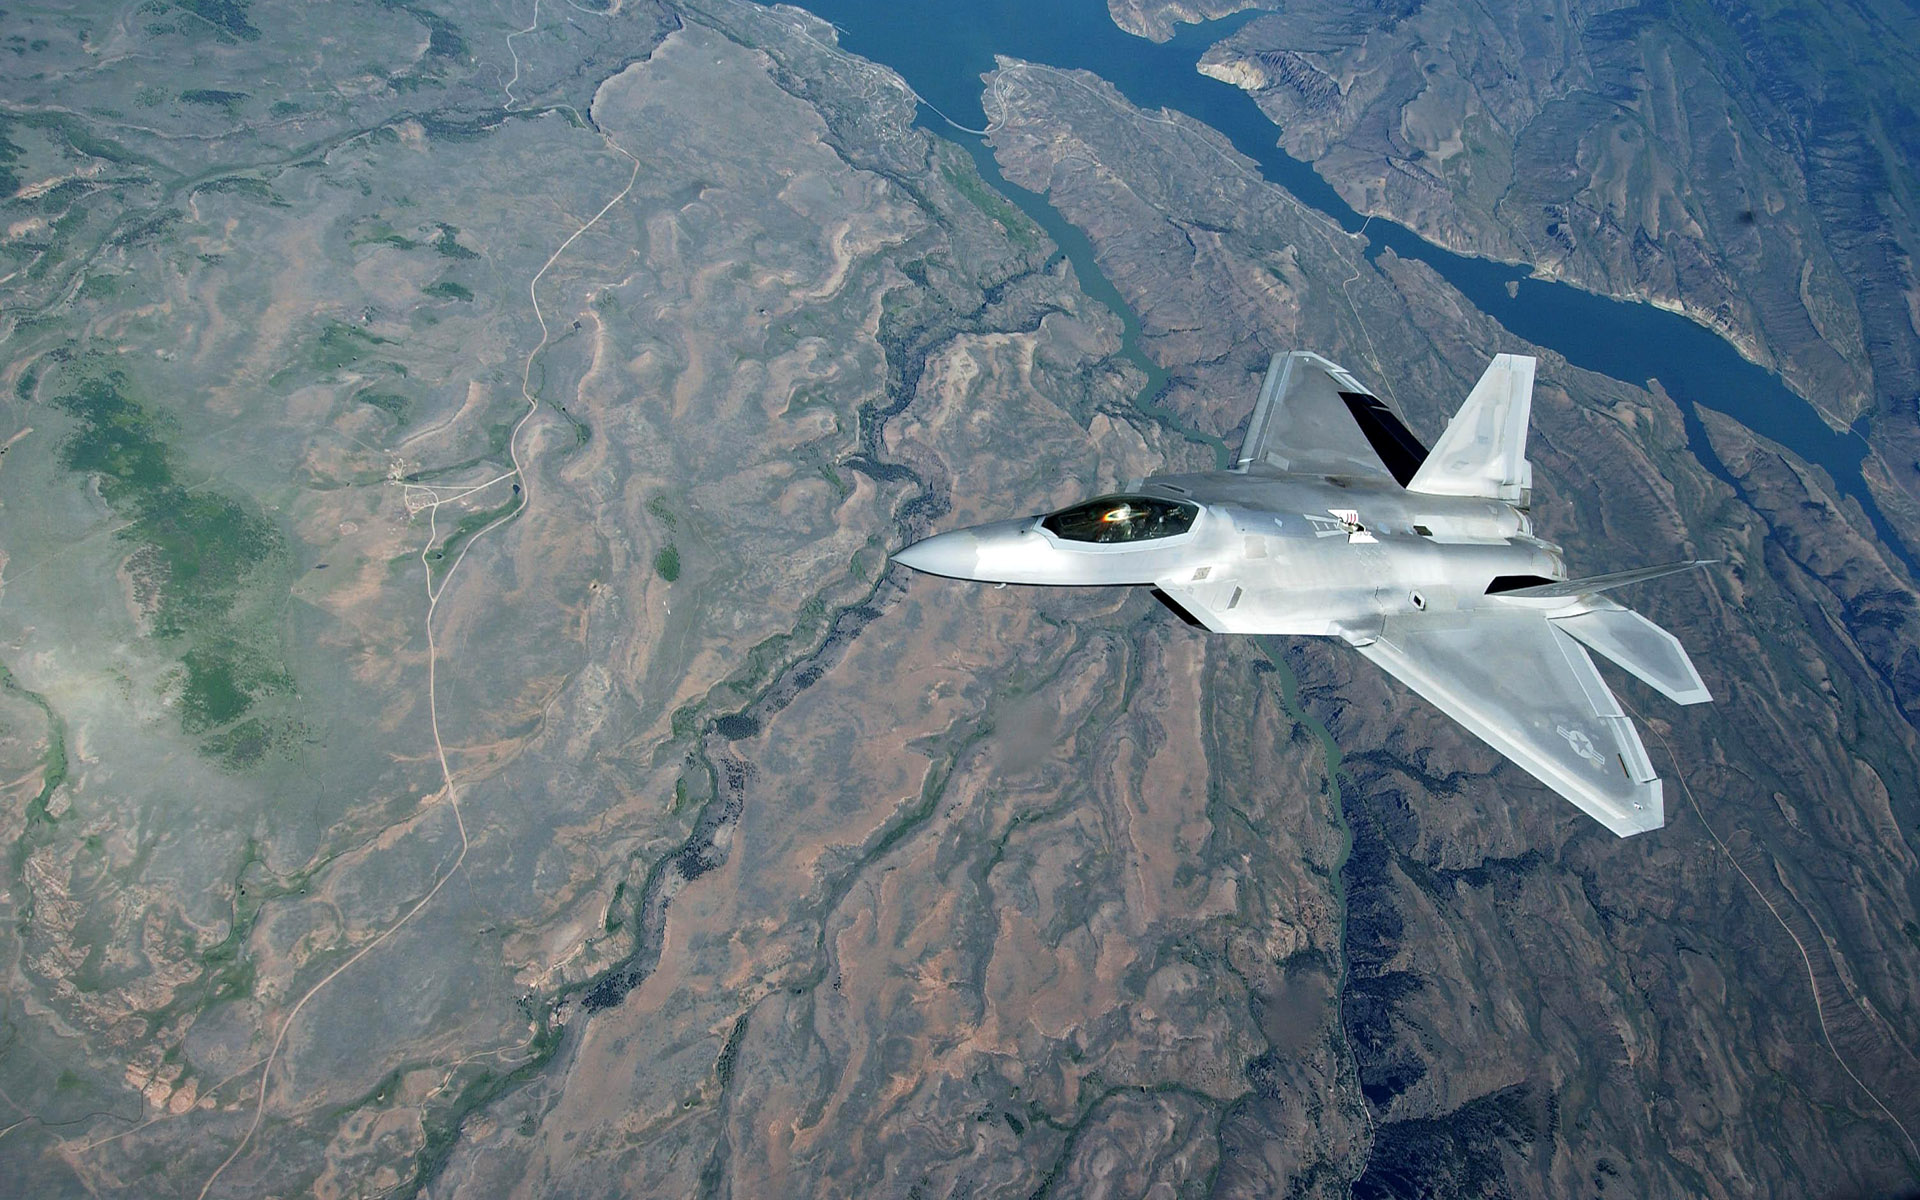 science, Landscapes, Aircraft, War, Fiction, Airplanes, F 22, Raptor, Jet, Aircraft Wallpaper